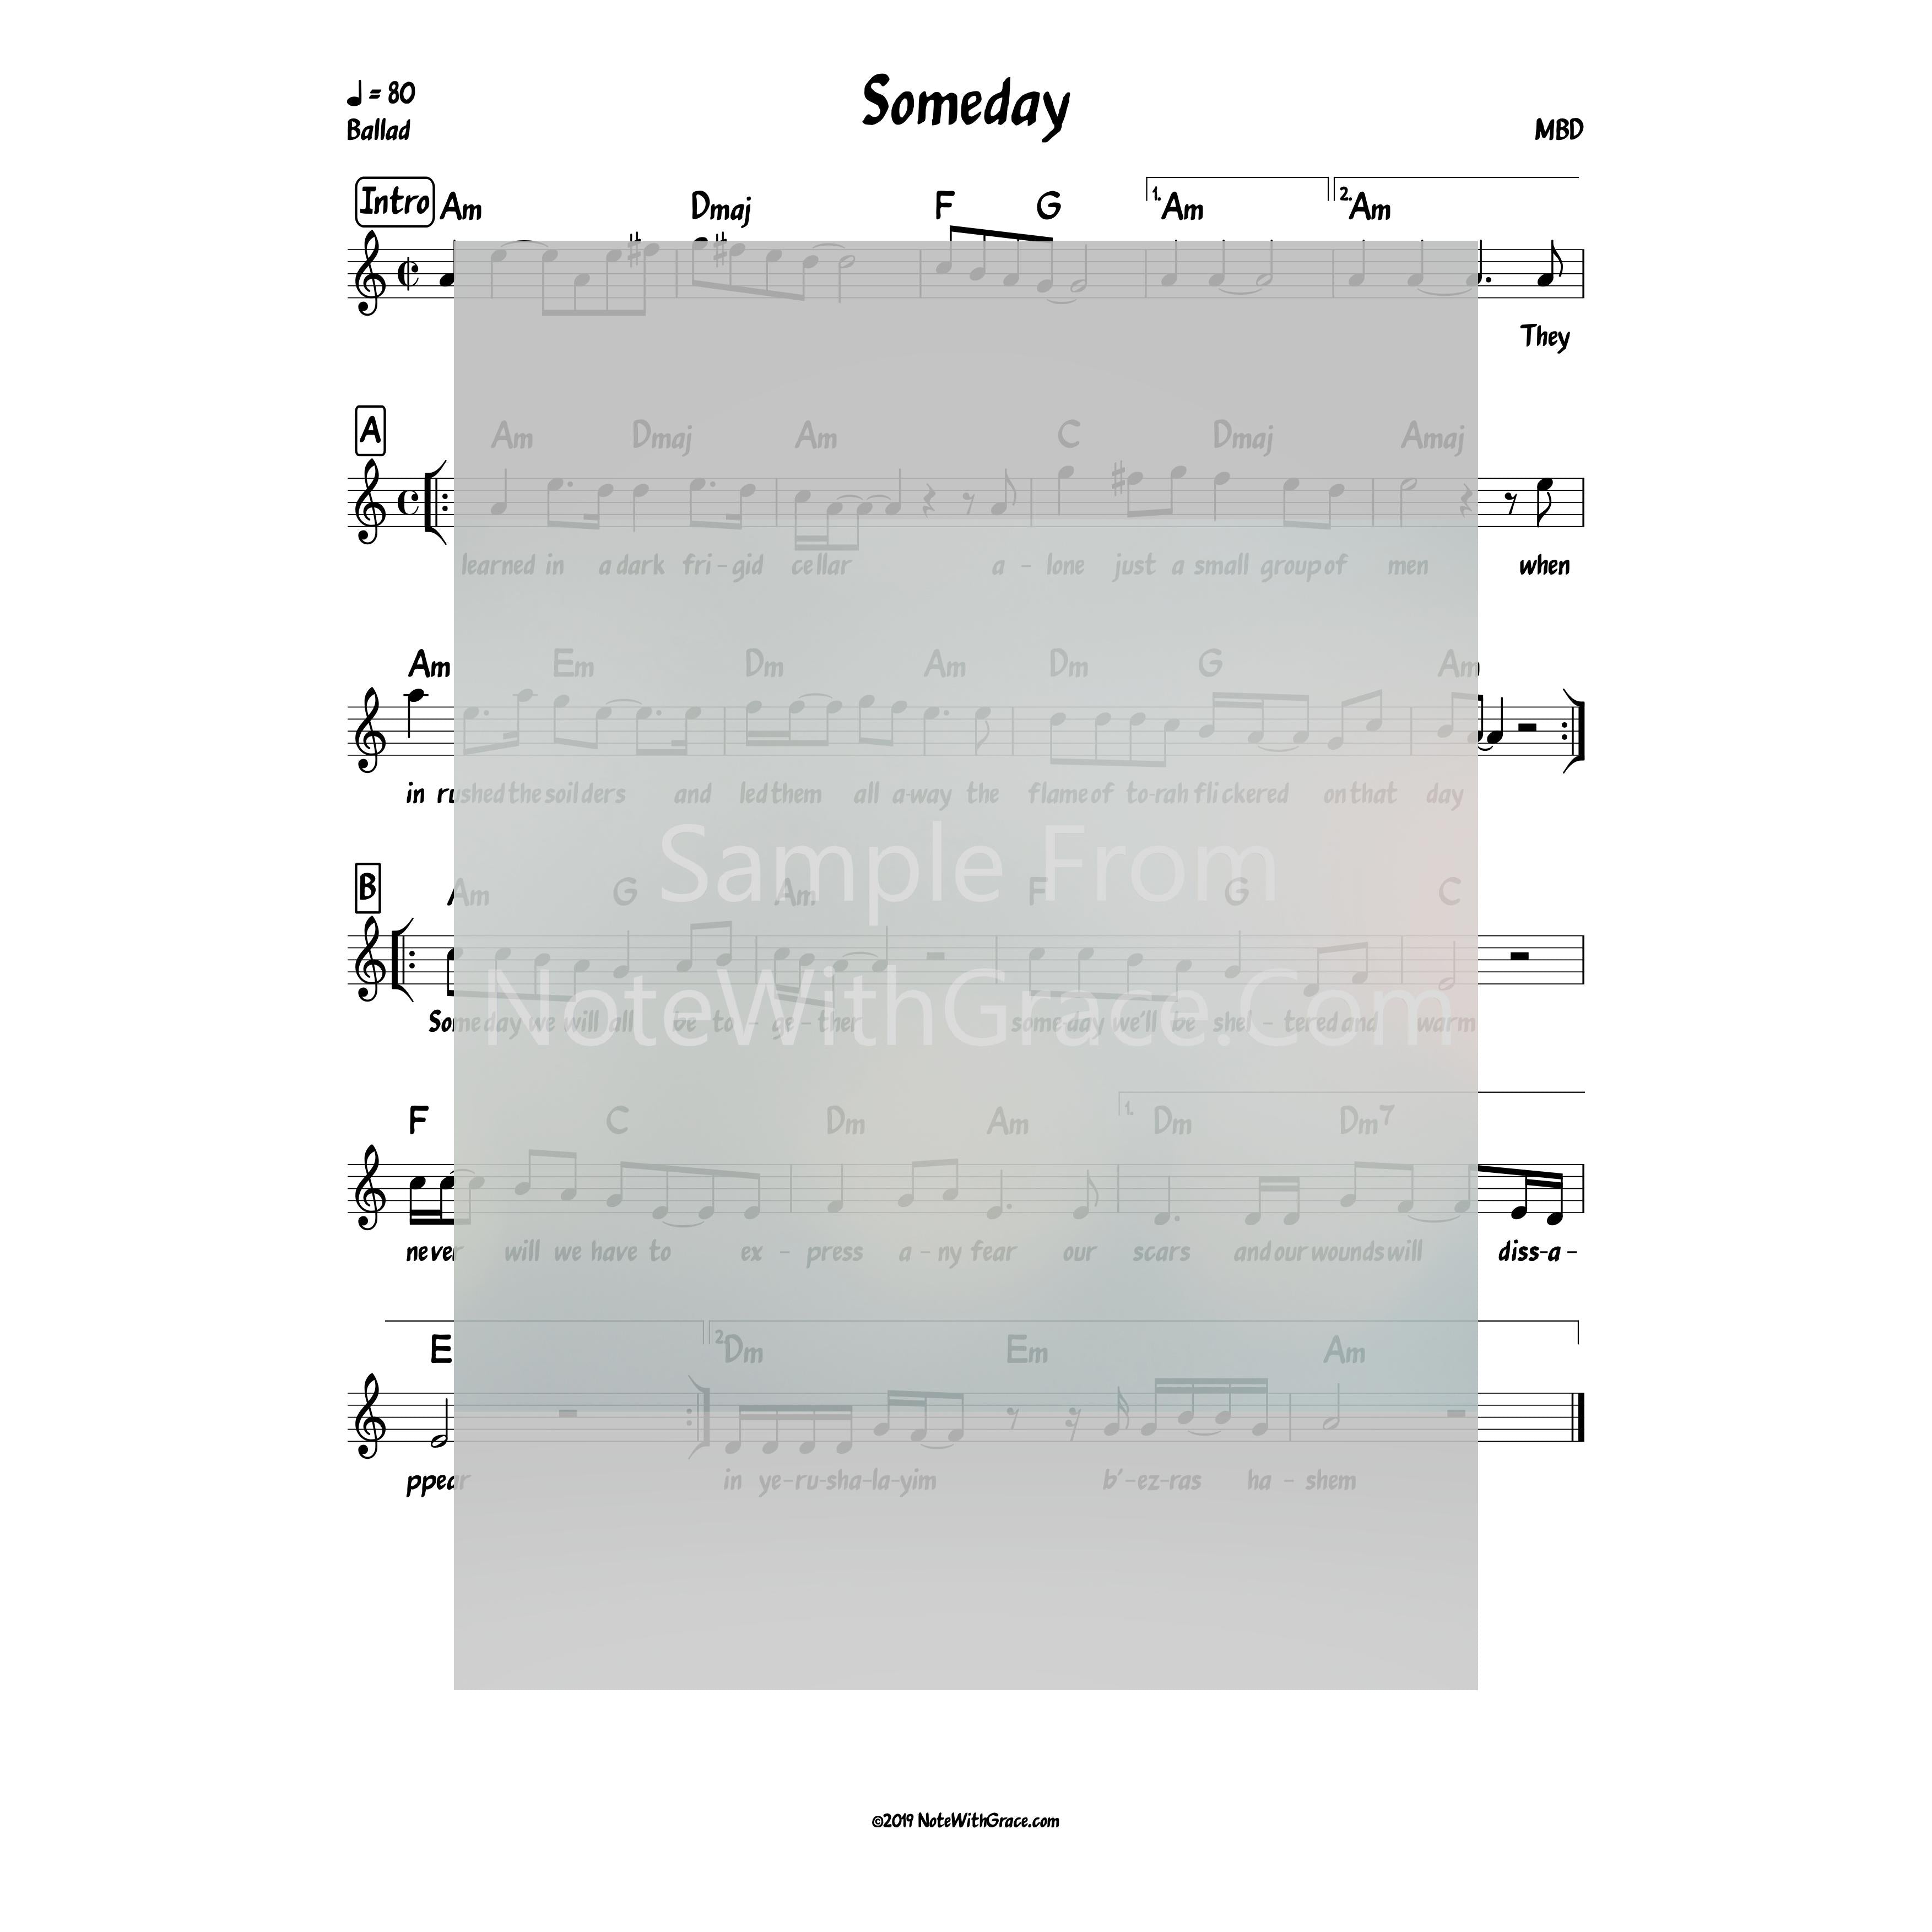 Someday Lead Sheet (MBD) Album Moshiach Released 1998-Sheet music-NoteWithGrace.com